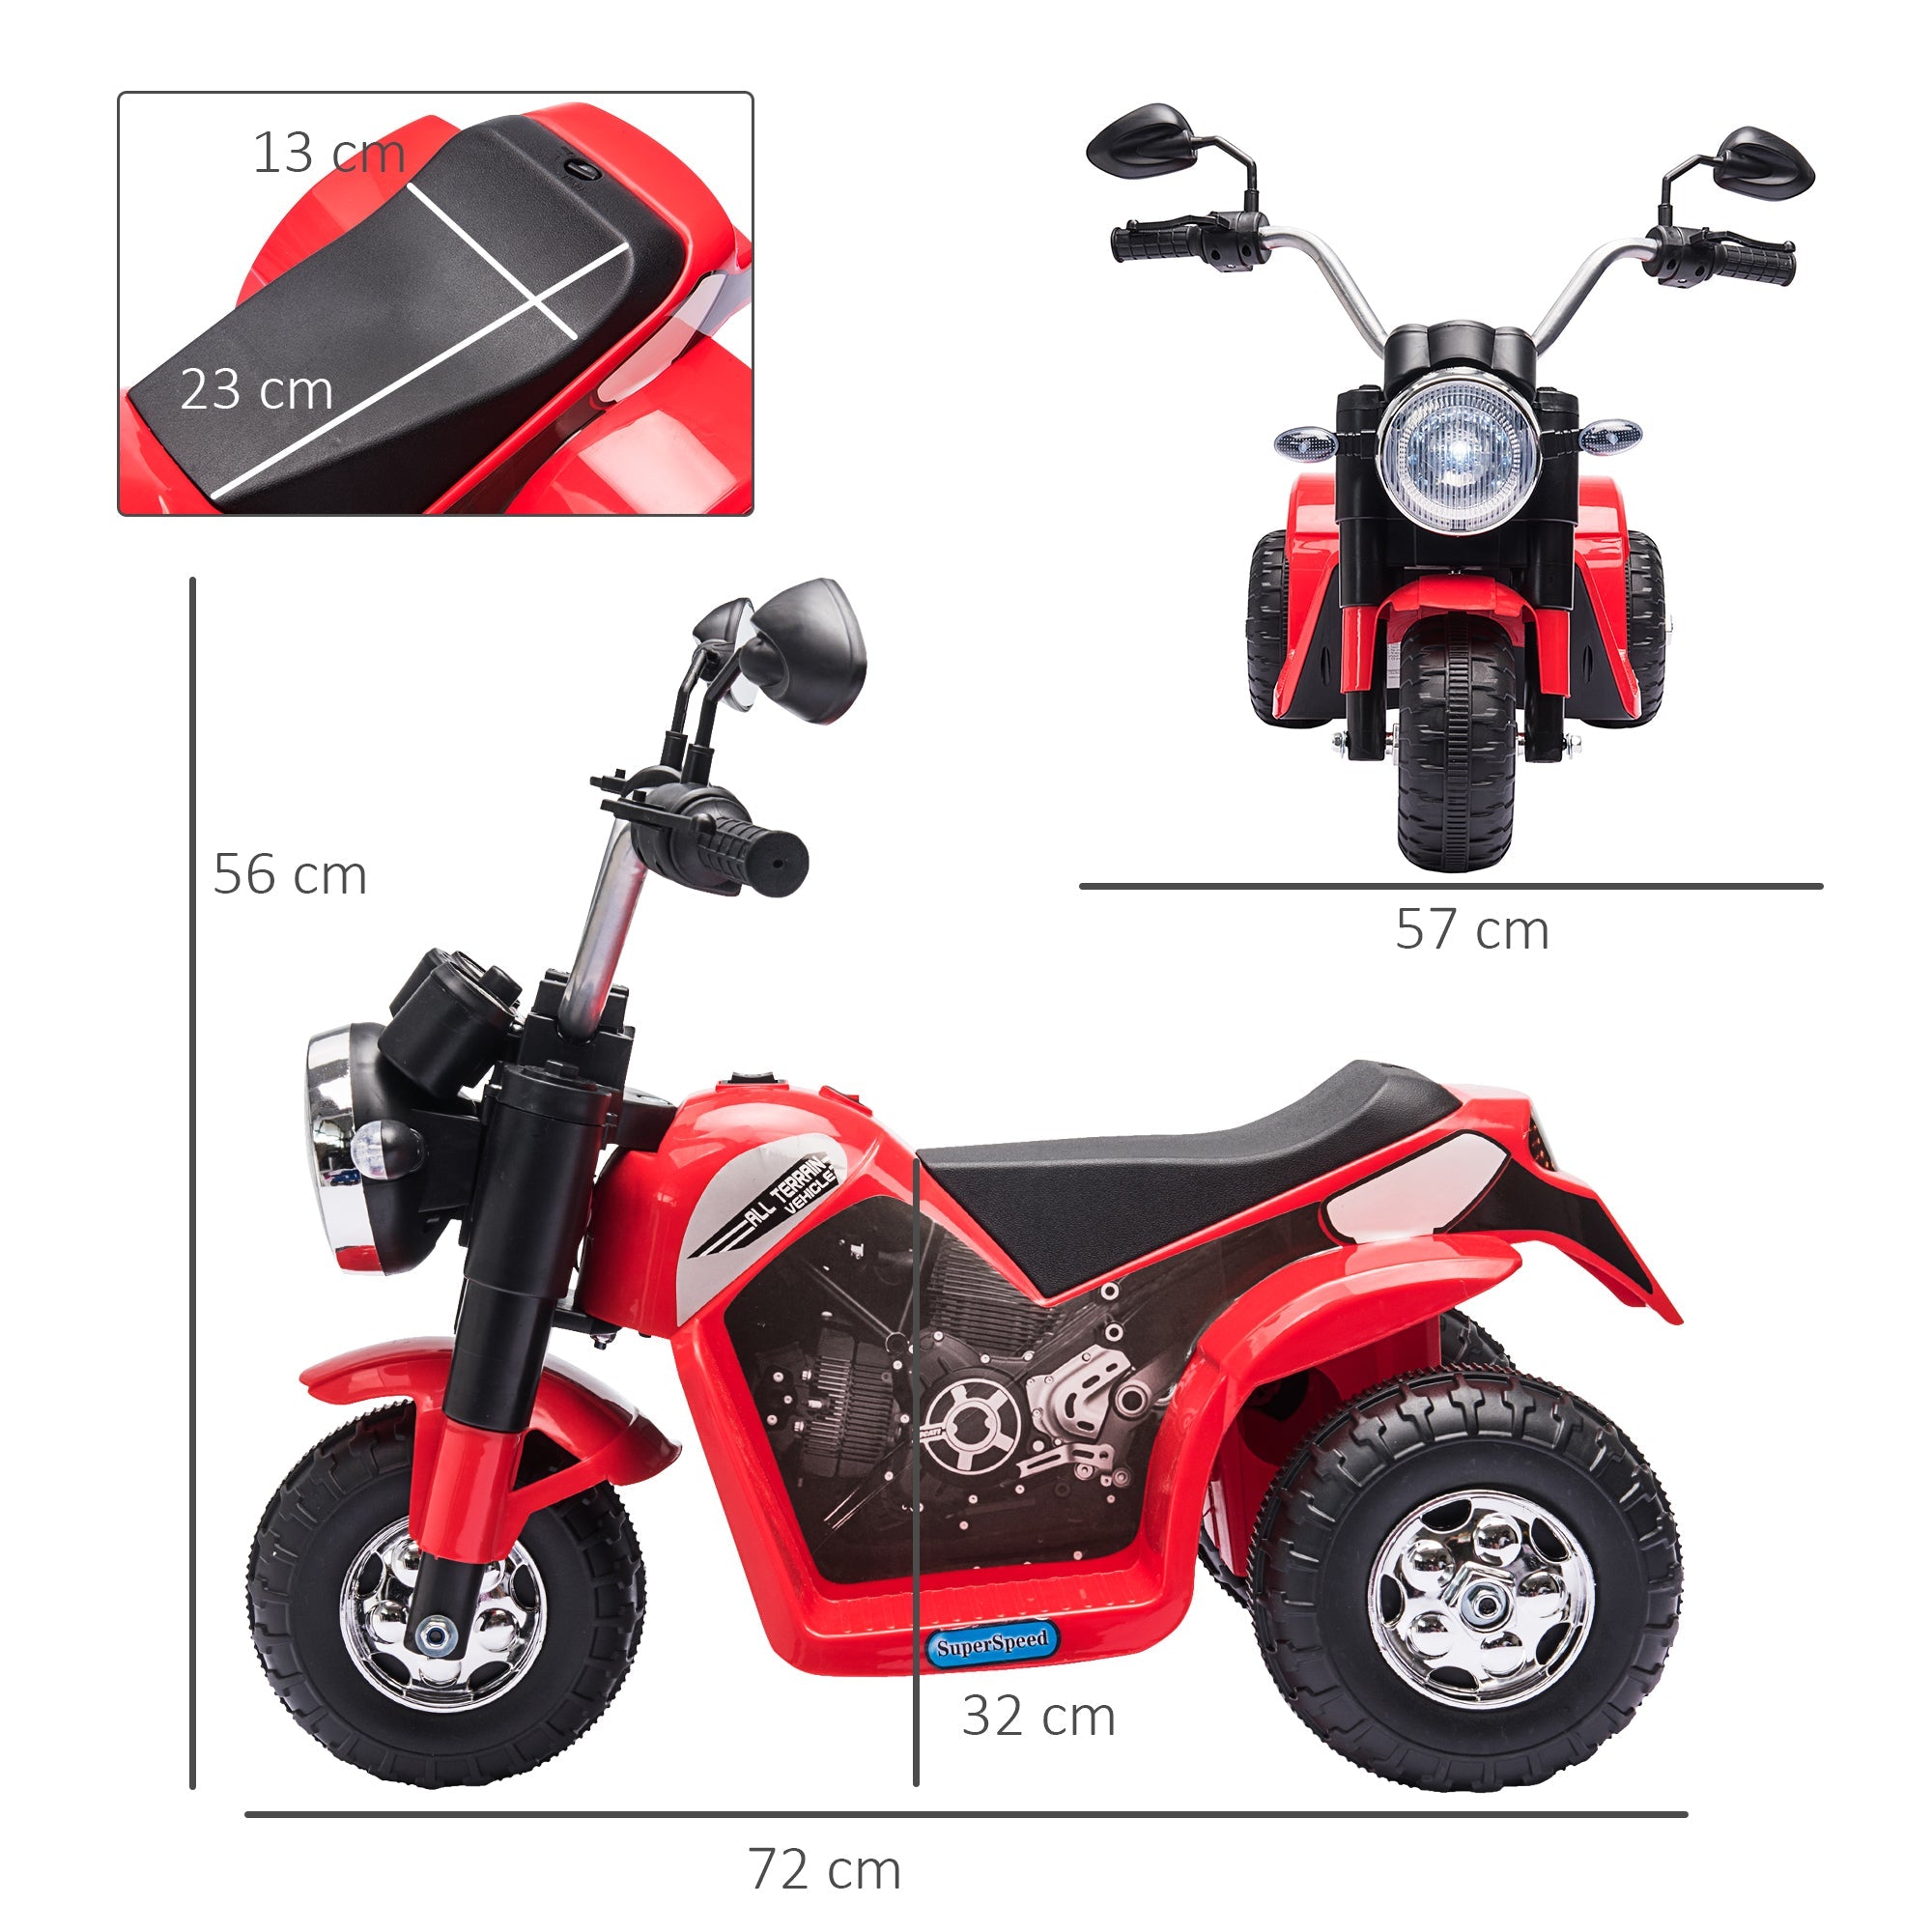 Kids Electric Motorcycle Ride-On Toy 3-Wheels Battery Powered Motorbike Rechargeable 6V with Horn Headlights Motorbike for 18 - 36 Months Red-2